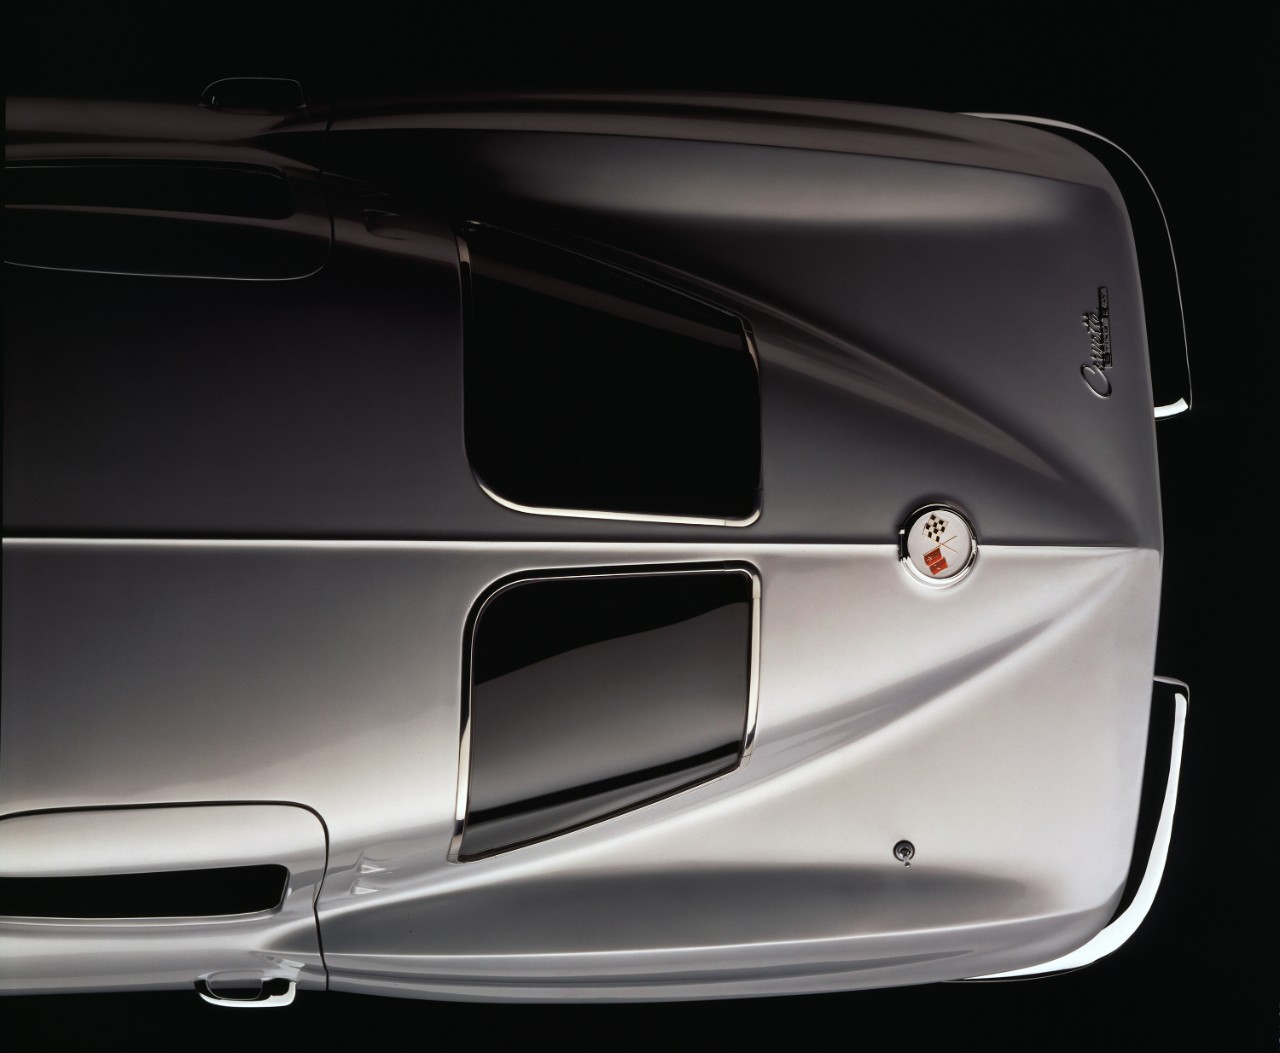 top view show of iconic 1963 Corvette rear split window assembly